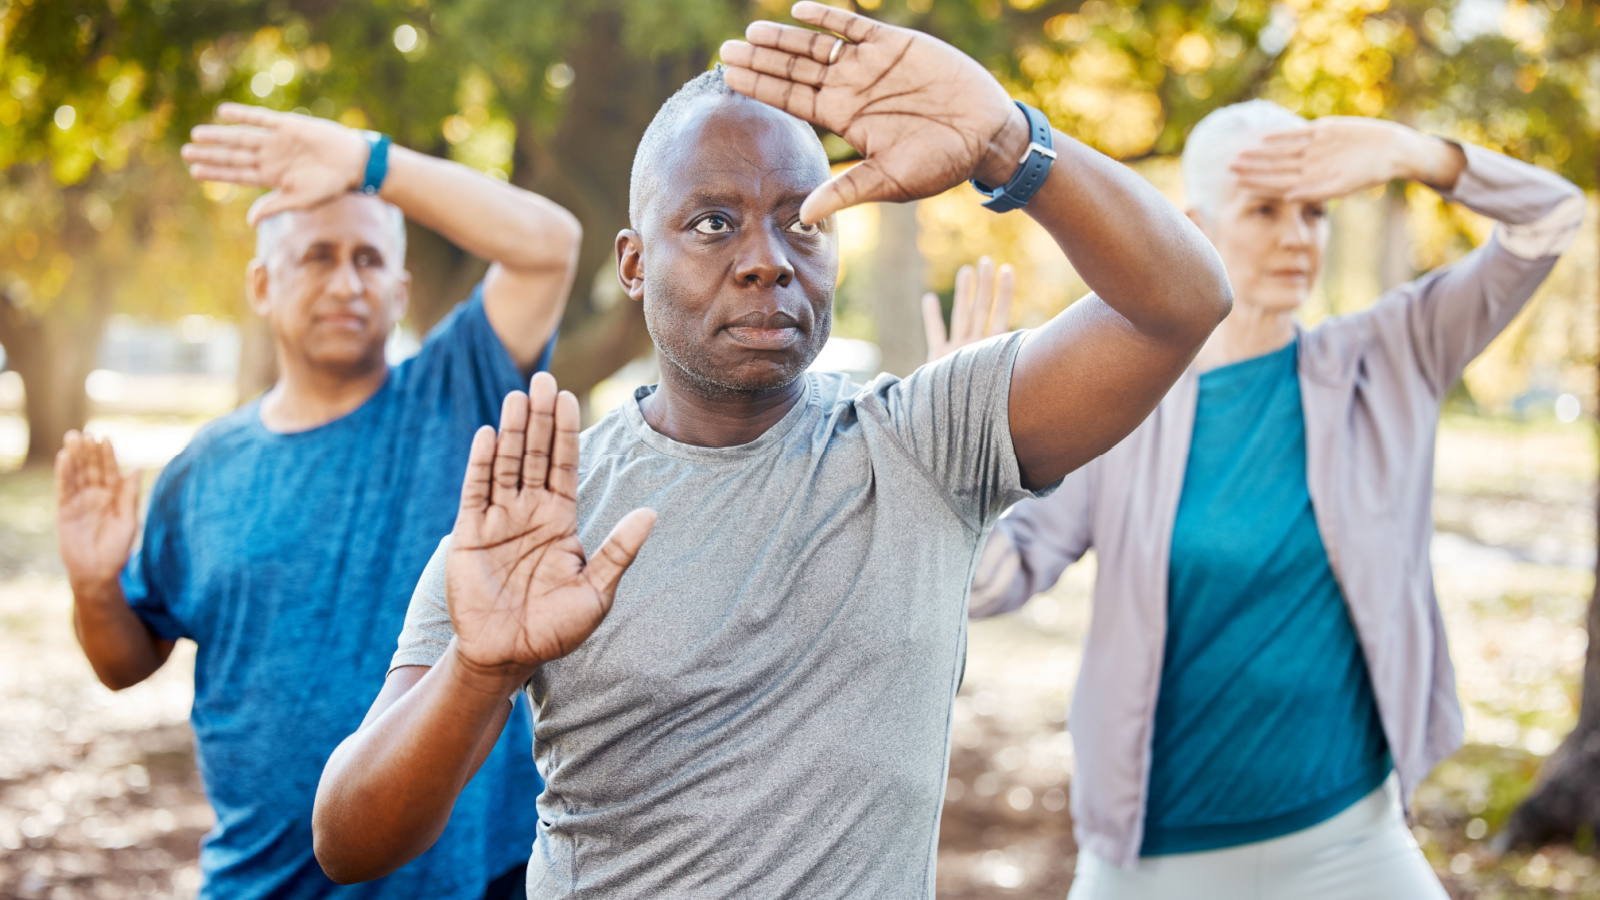 image credit: PeopleImages.com/Yuri A Shutterstock <p><span>Discover the gentle art of Tai Chi, a practice that combines slow, deliberate movements with deep breathing. This program is ideal for enhancing flexibility, balance, and peace of mind. The slow pace and flowing movements are perfect for those over 50, promoting both physical and mental well-being. Experience a sense of calm and control as you move through each form.</span></p>